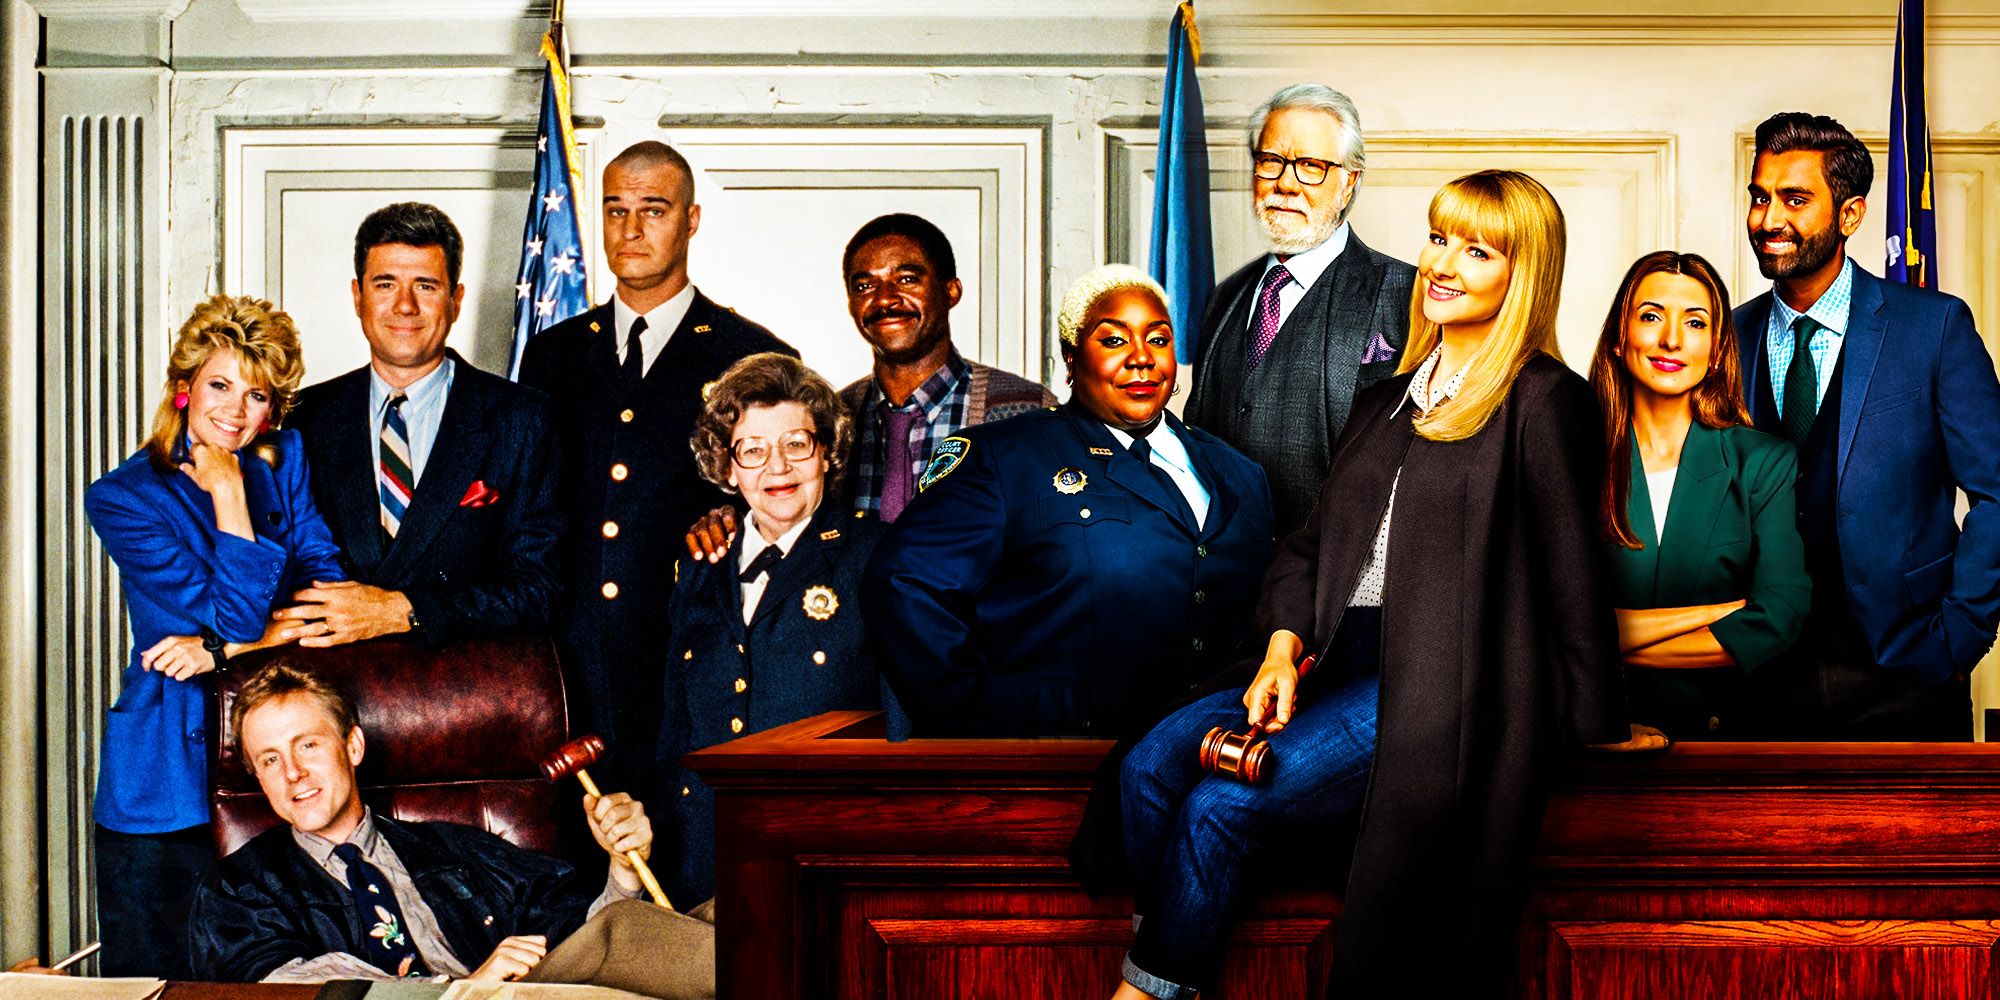 Night Court Reboot s New Characters Don t Live Up To The Original Cast